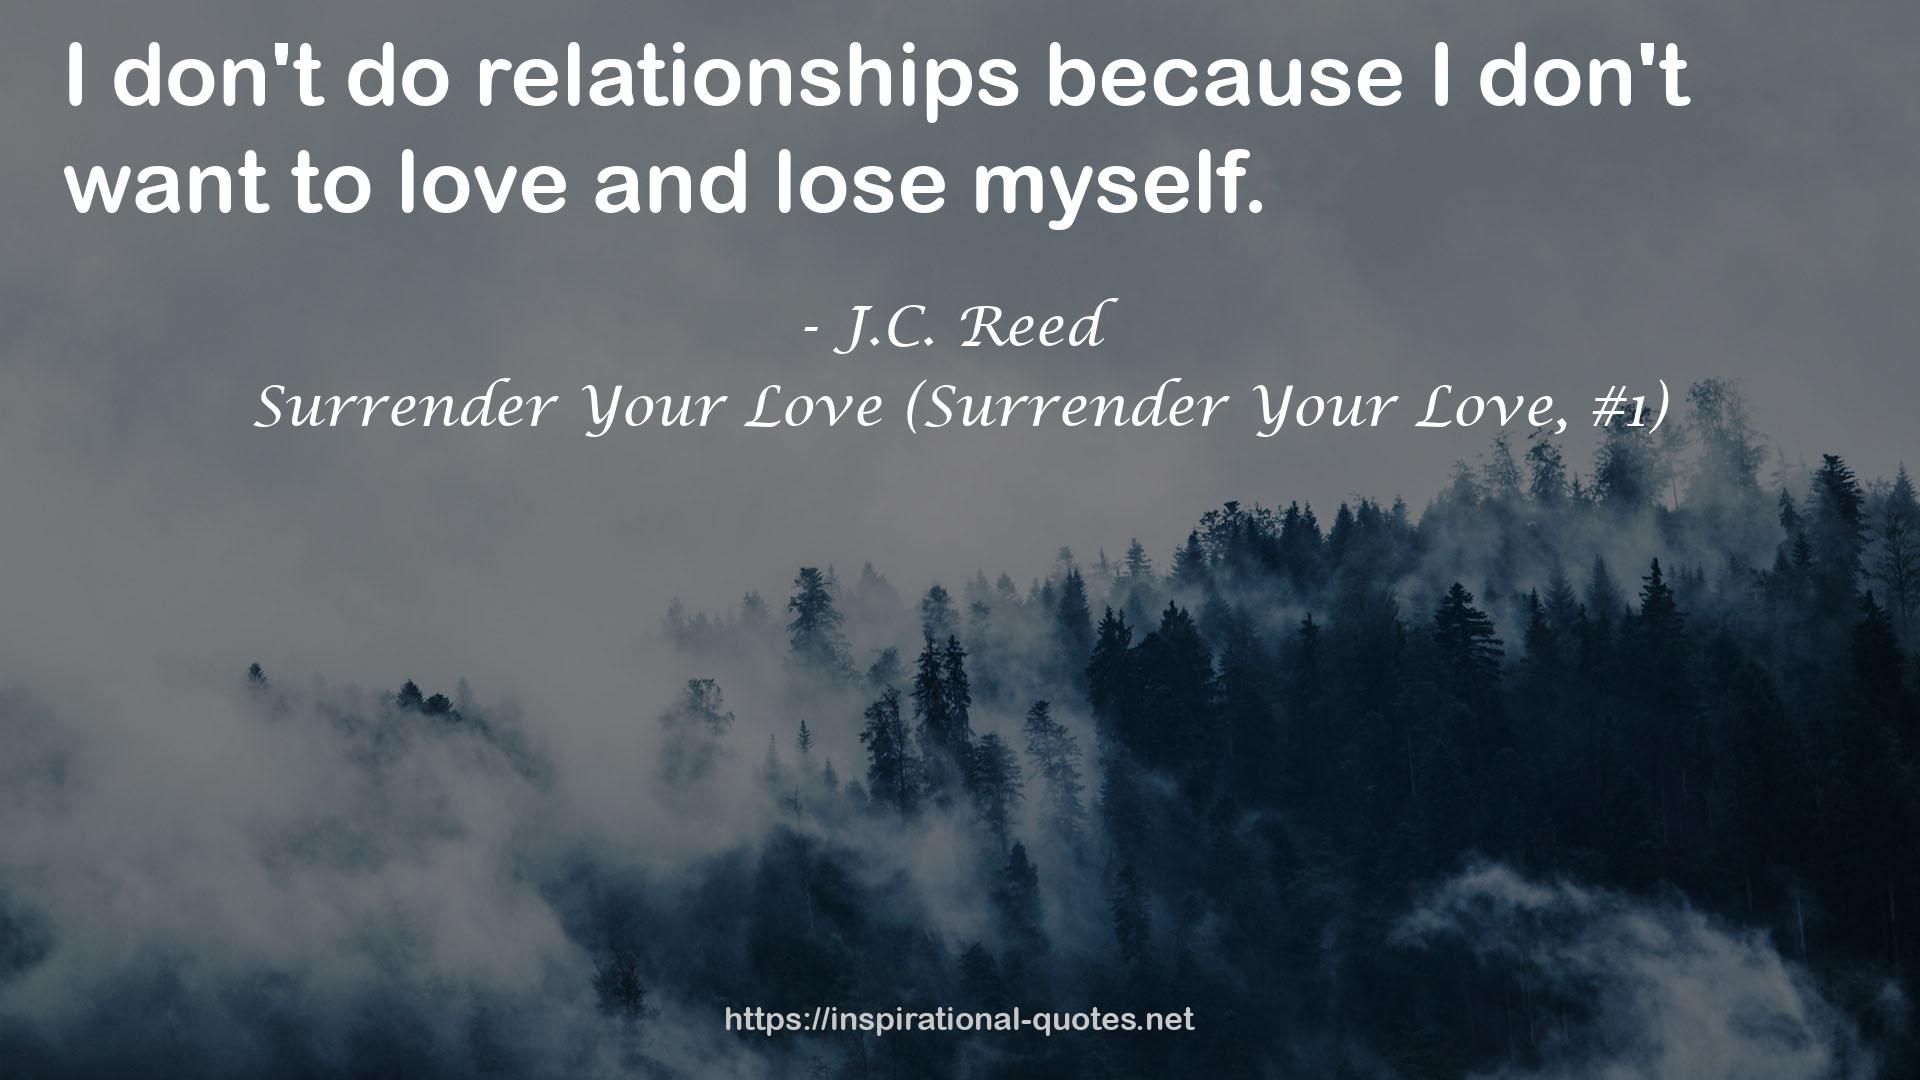 Surrender Your Love (Surrender Your Love, #1) QUOTES